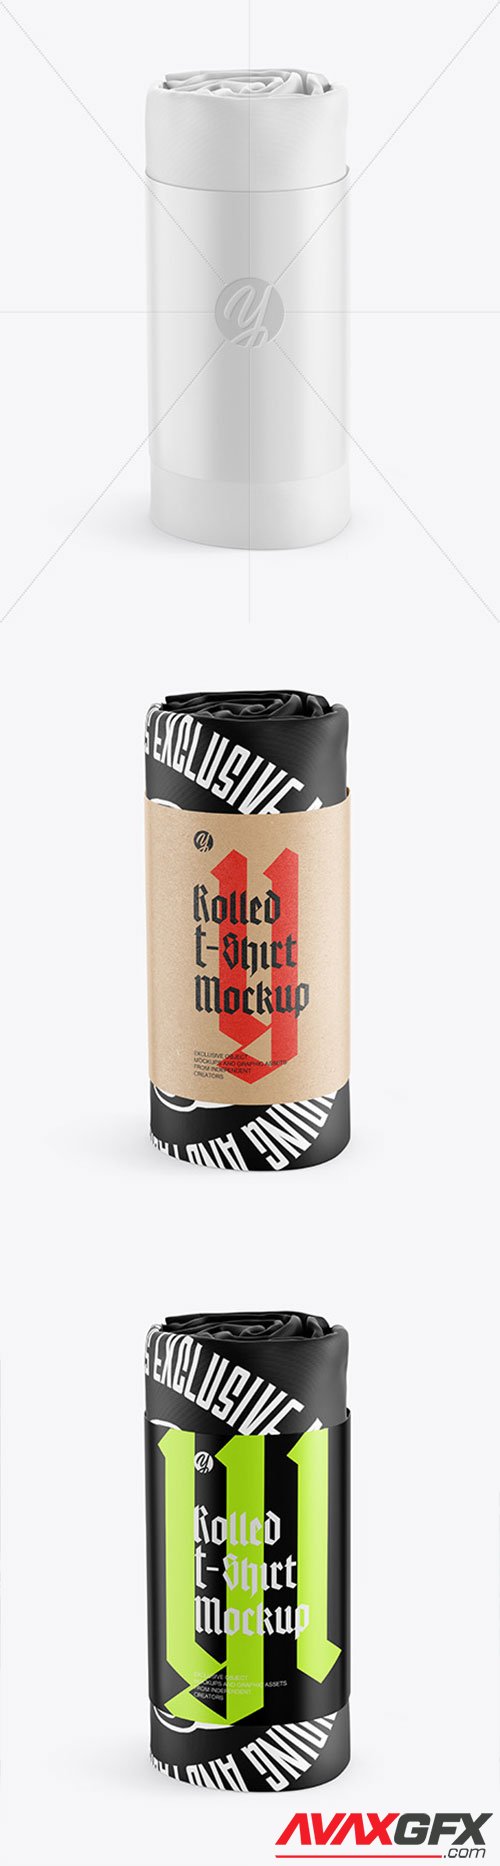 Rolled T-Shirt w/ Paper Label Mockup 66639